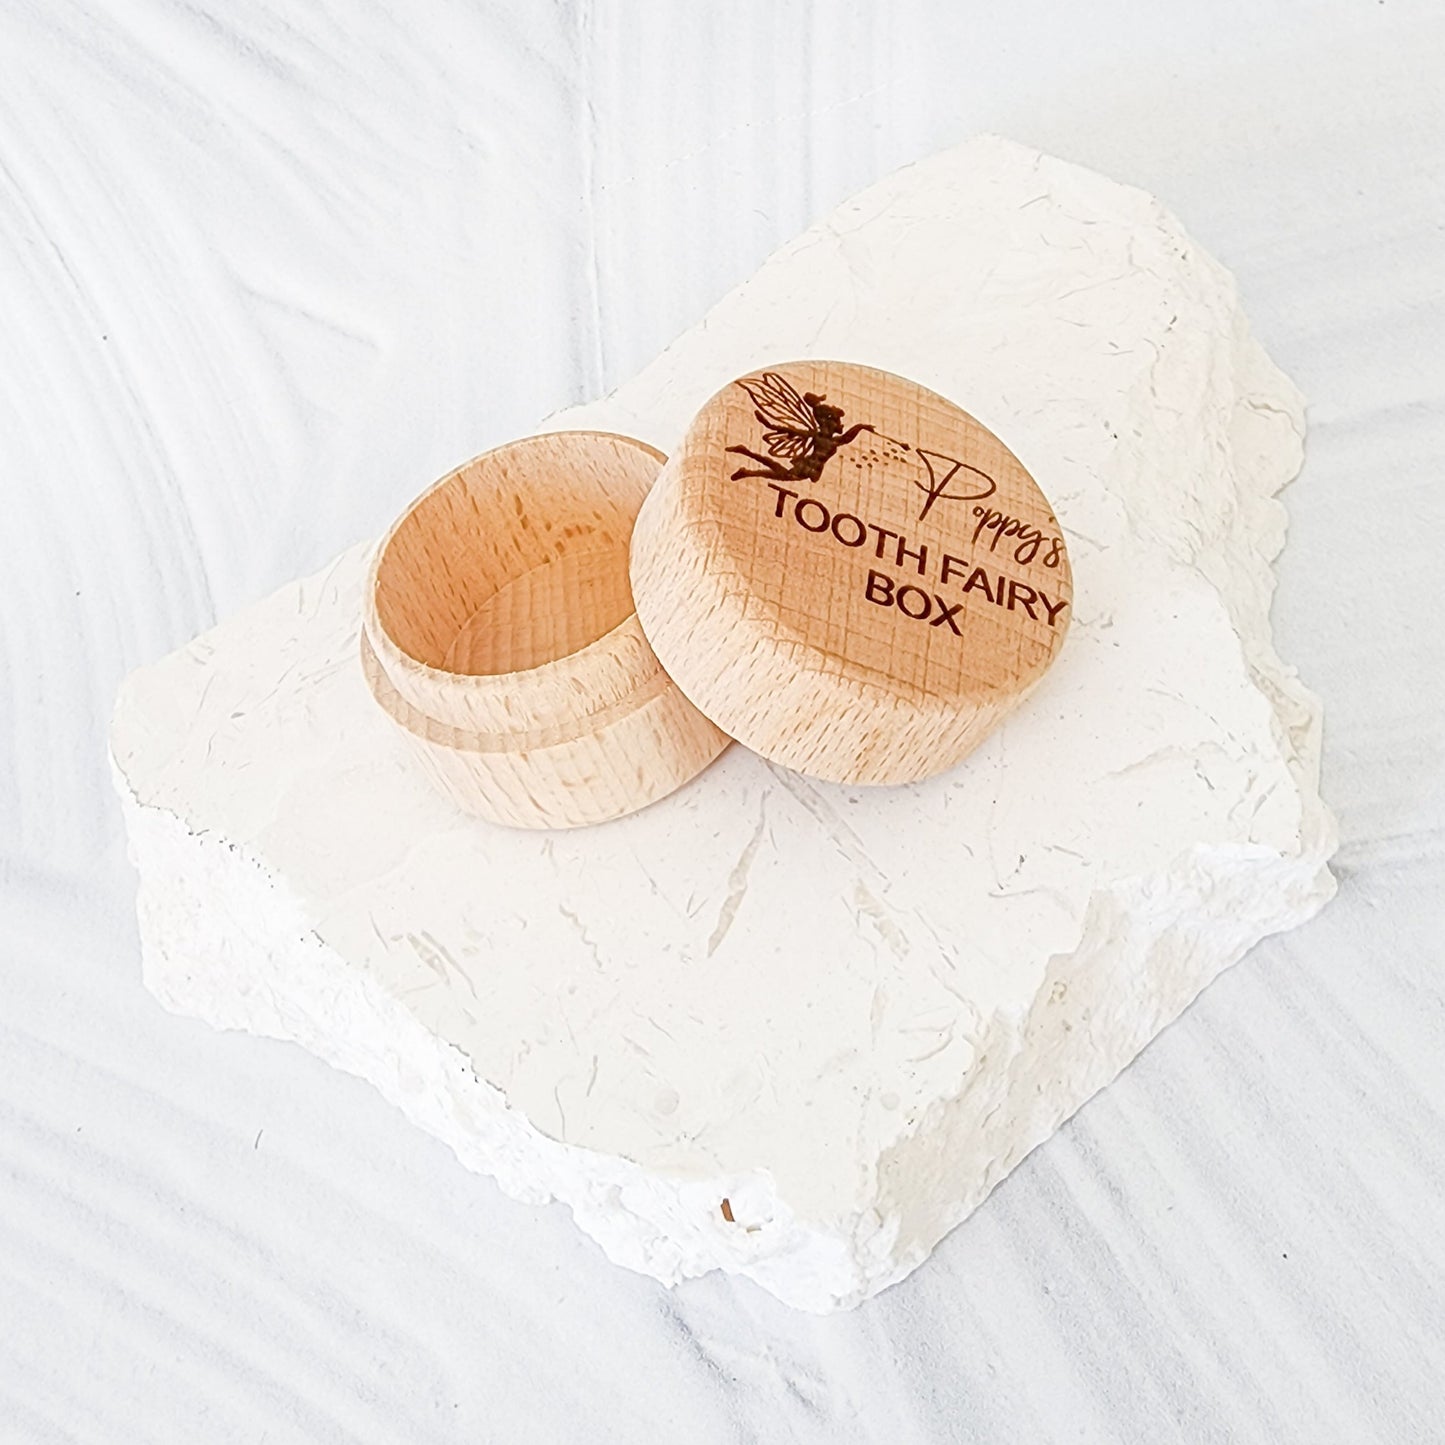 Personalised Round Wooden Tooth Fairy Box